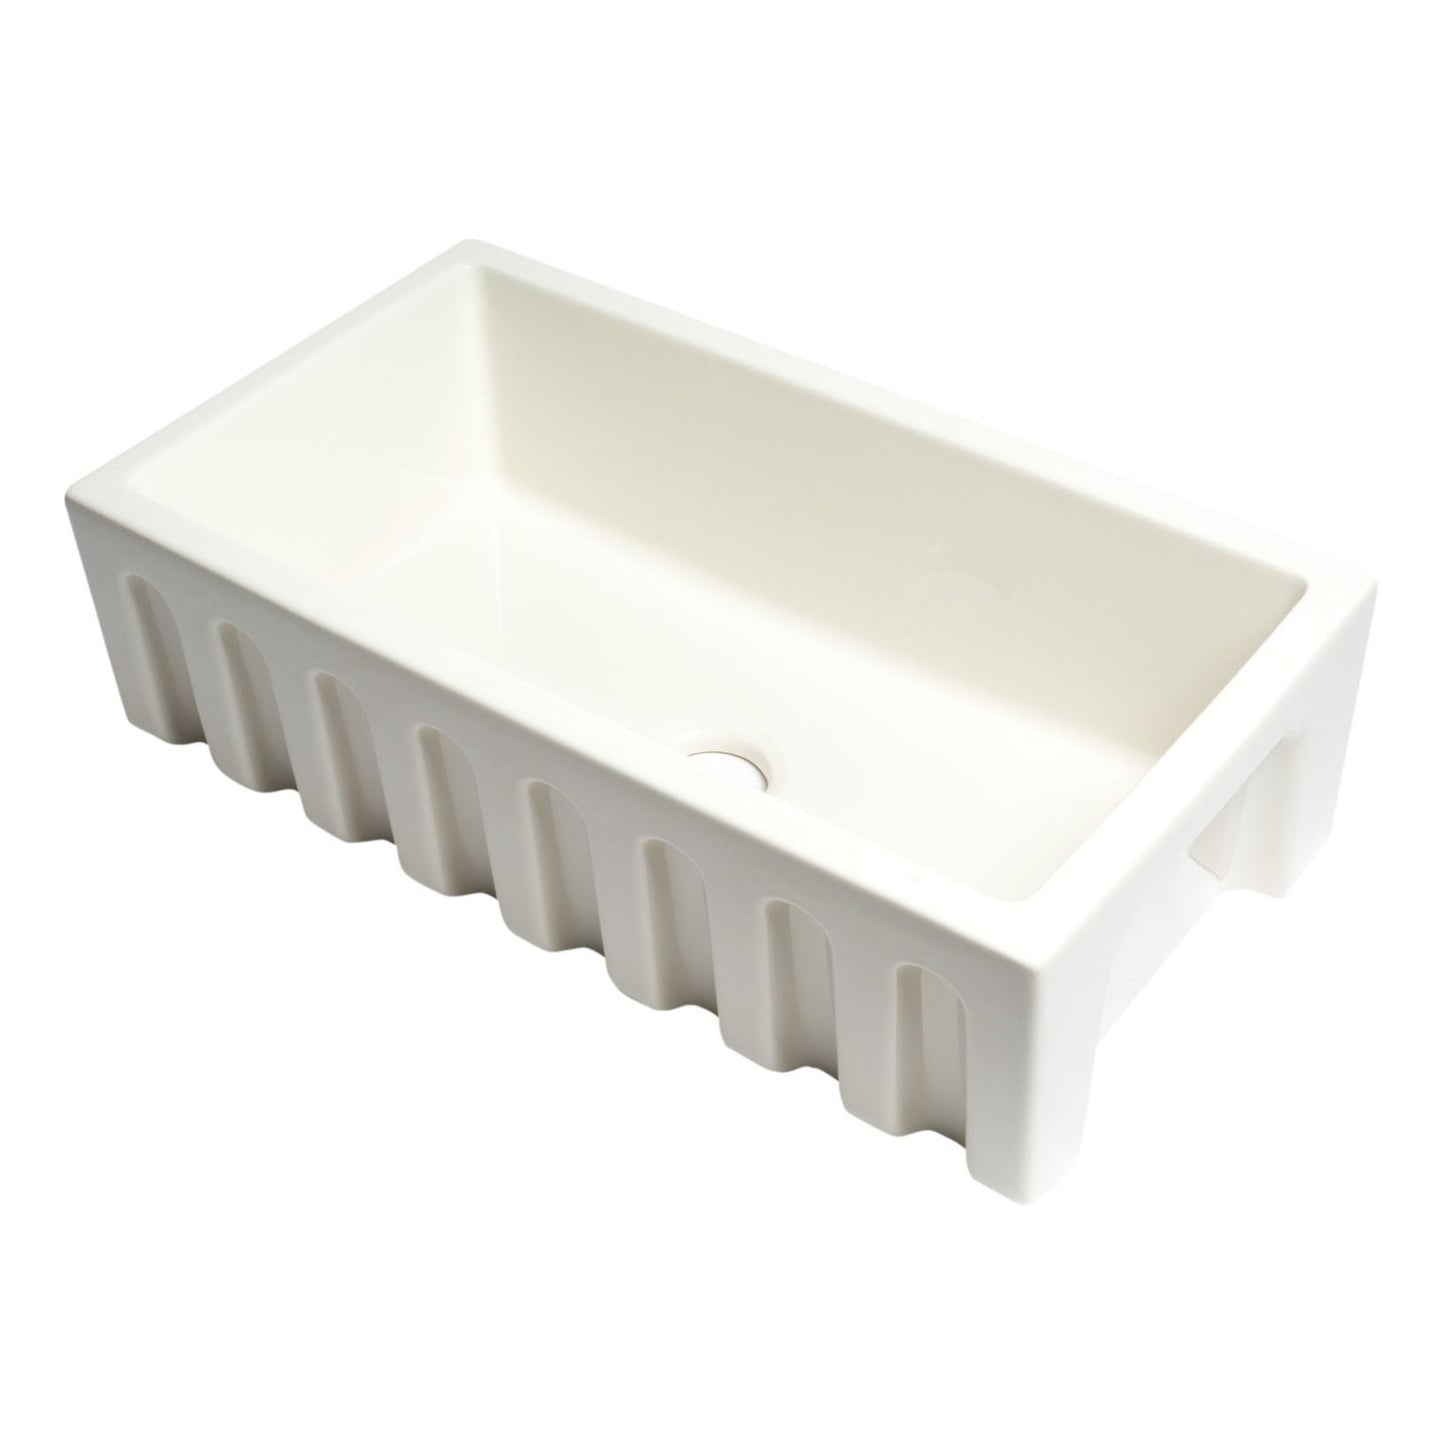 ALFI Brand AB3318HS-B Biscuit 33" x 18" Reversible Fluted / Smooth Fireclay Farm Sink